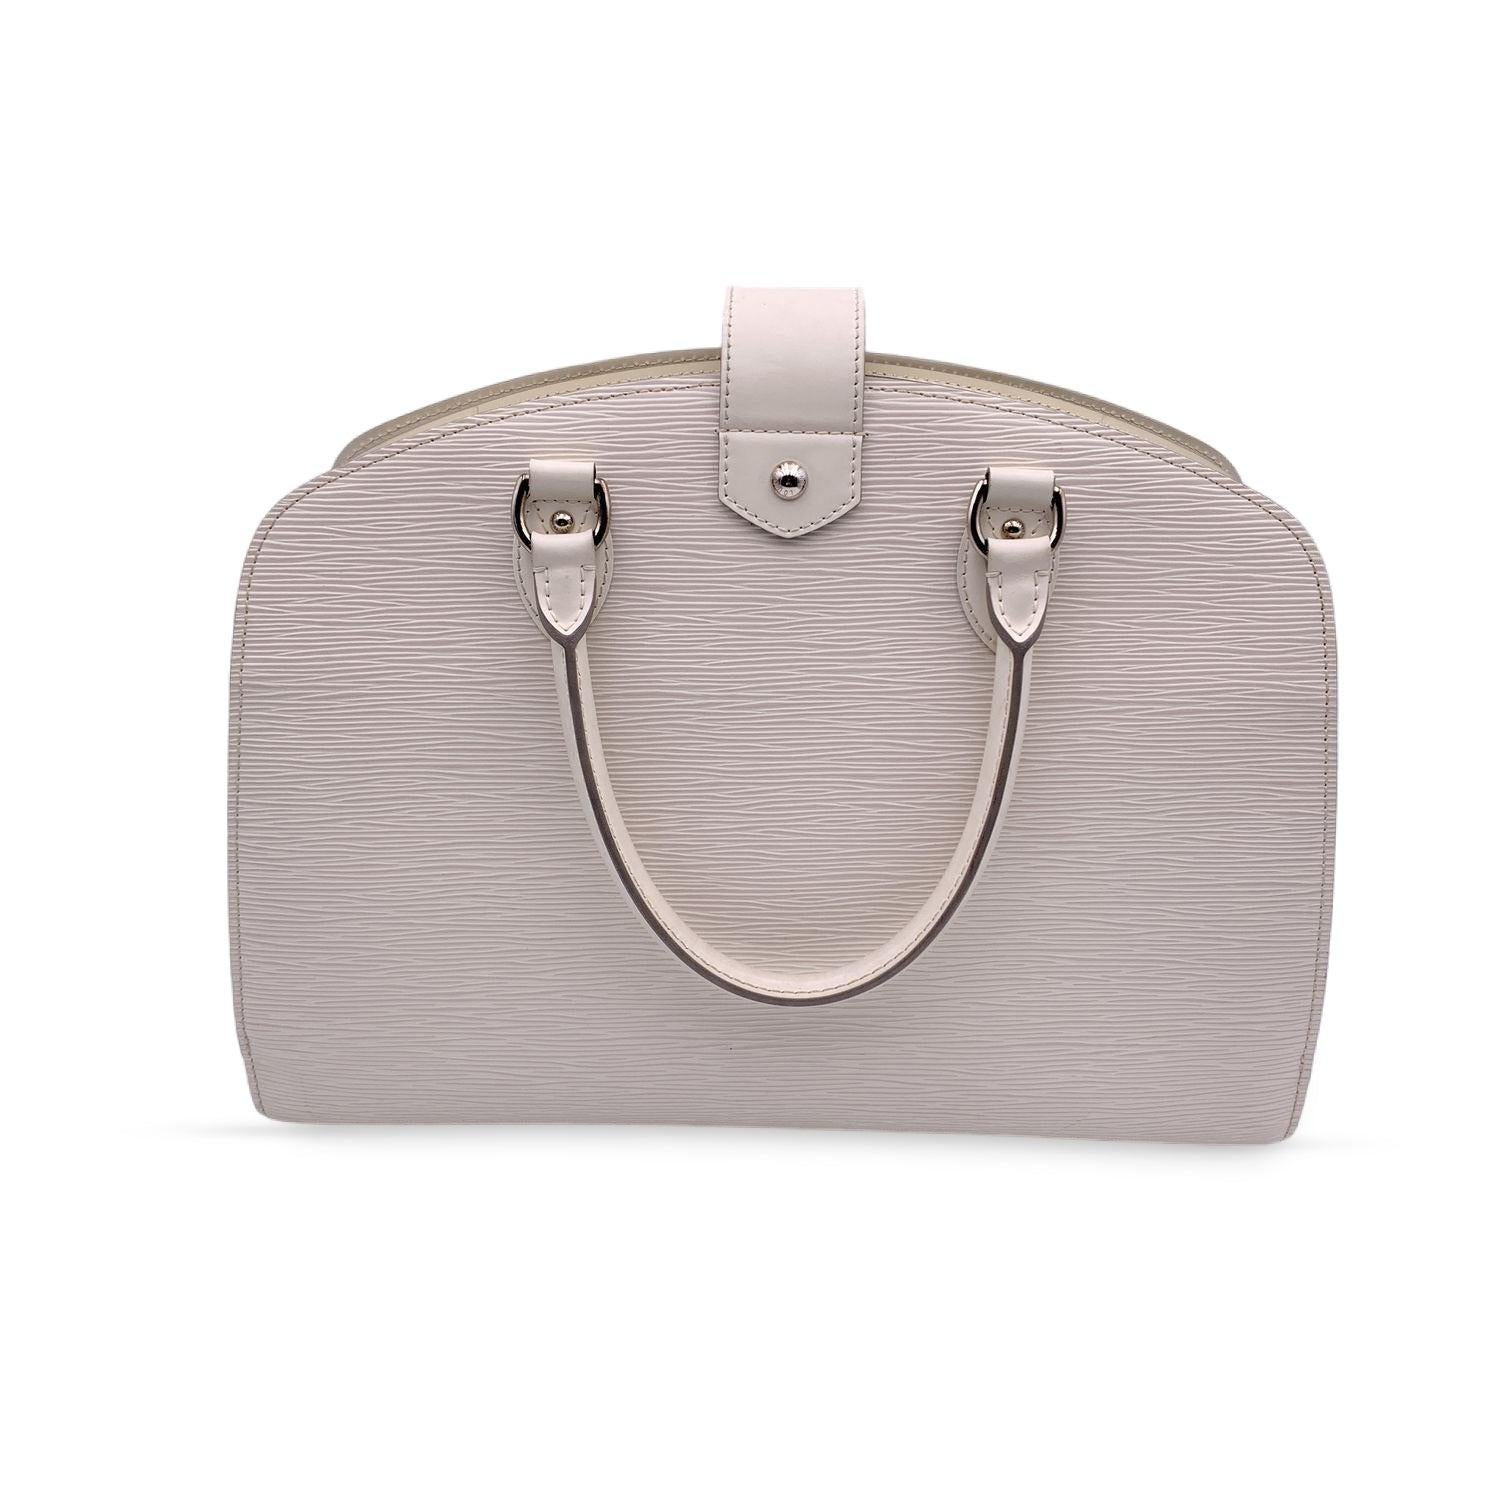 Louis Vuitton Epi Leather Pont-Neuf GM in white Epi leather. Silver-tone hardware. Fold over strap with clac closure and upper zipper closure. Side padlock, with two keys and leather clochette included. Double rolled leather handle. 1 open section